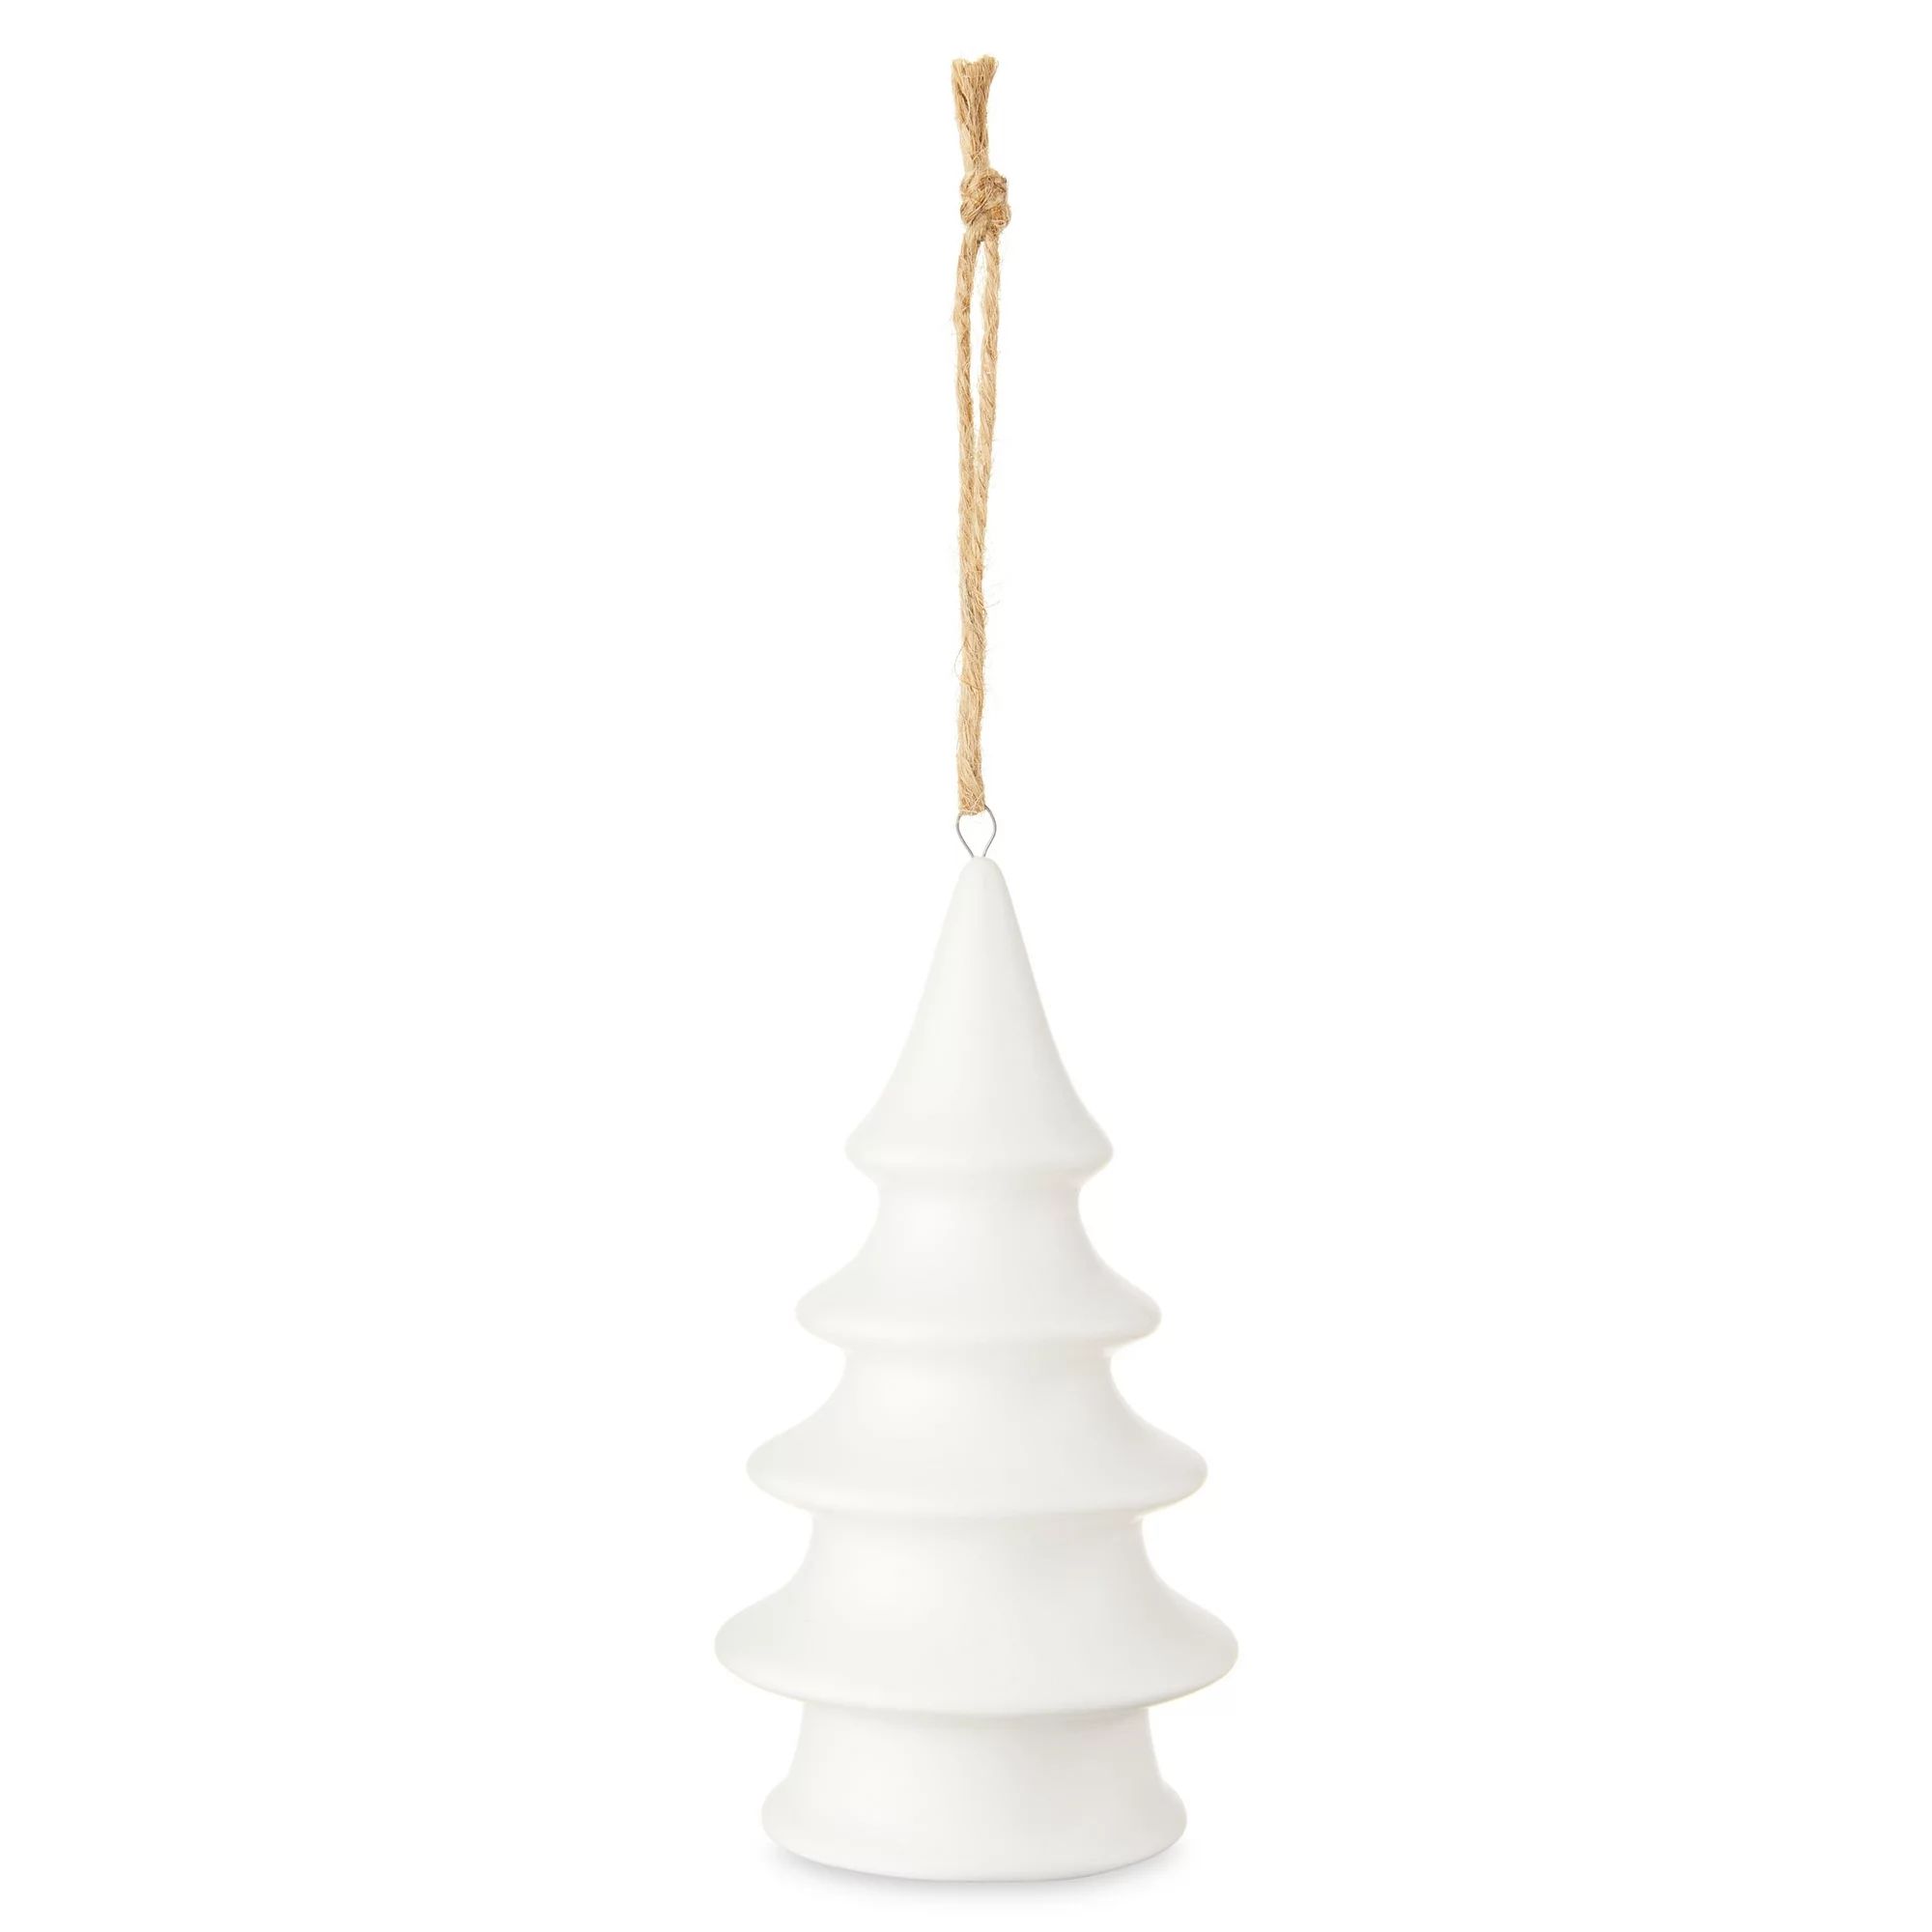 Ceramic White Tree Christmas Ornament, 5 in, by Holiday Time | Walmart (US)